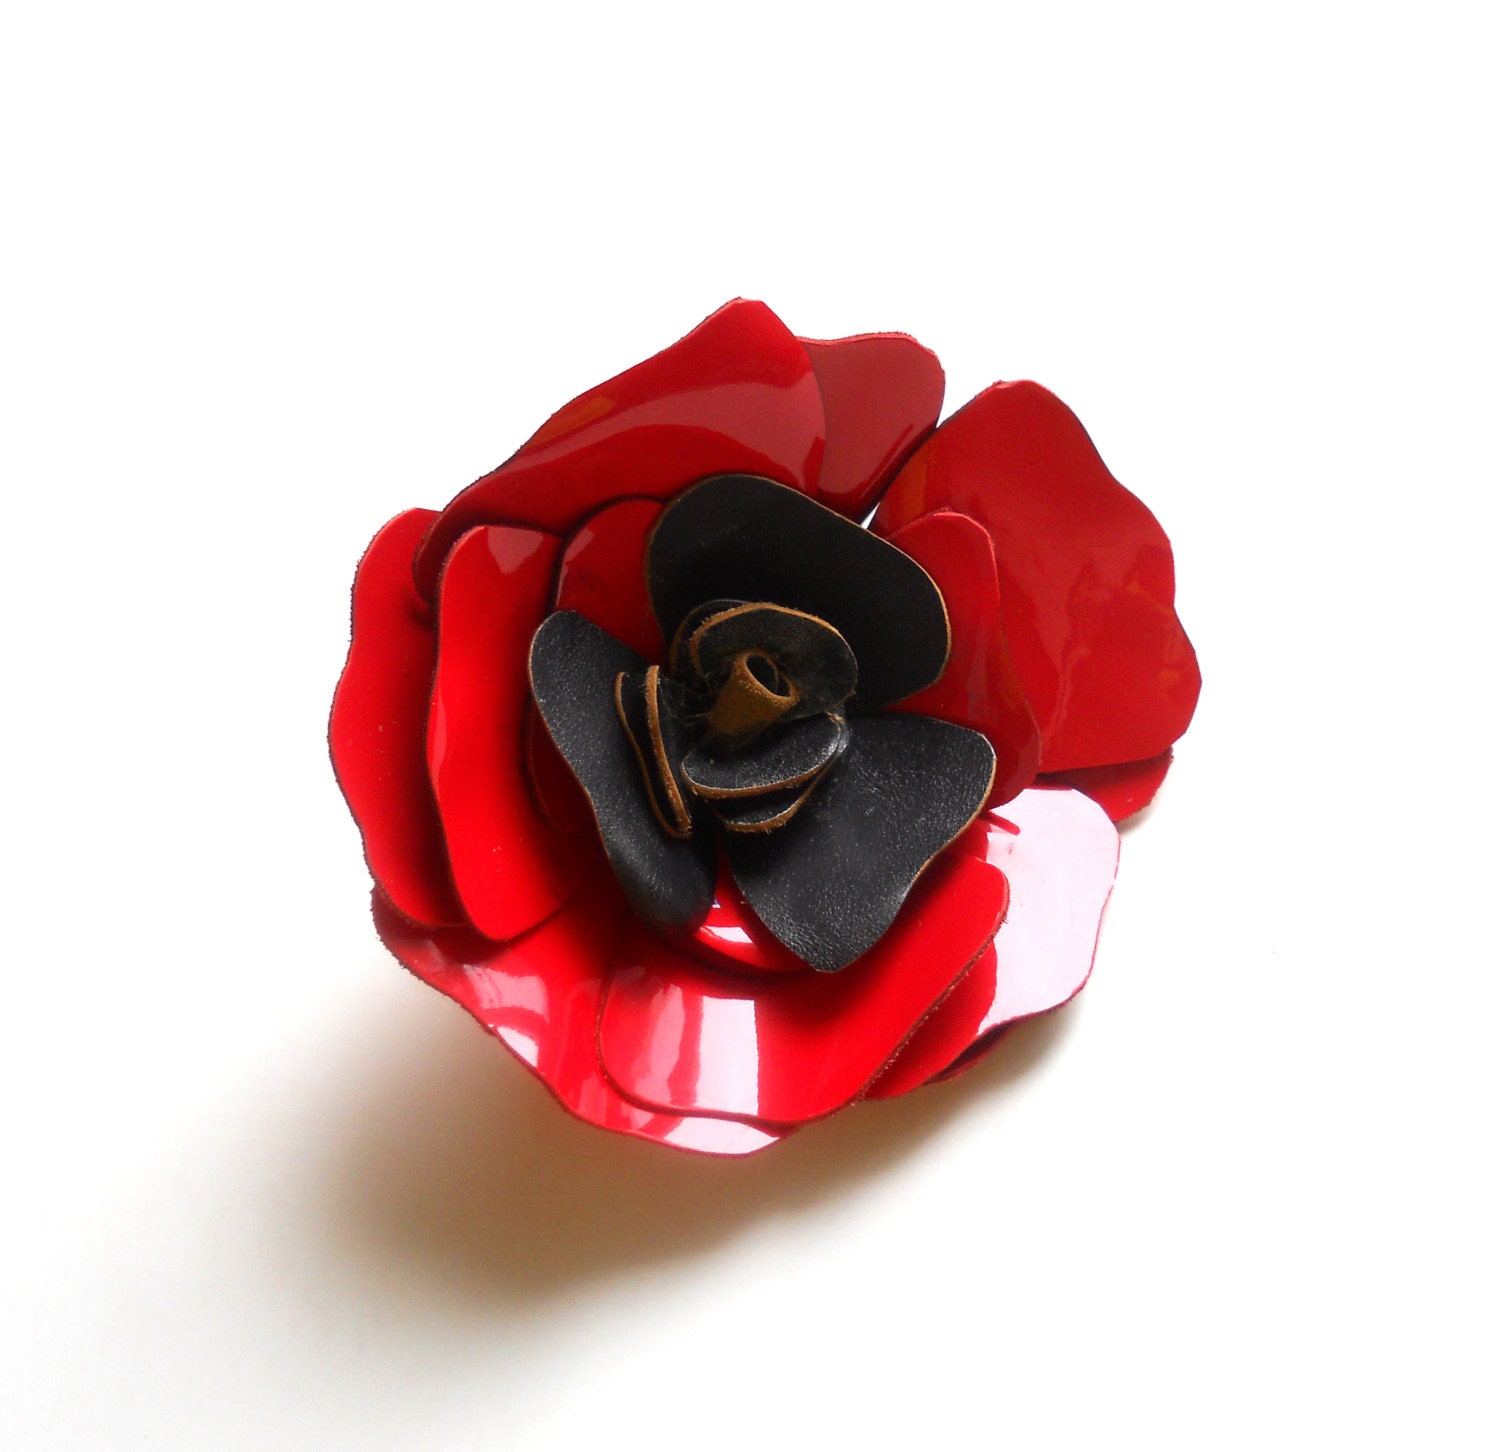 Leather Rose Brooch in Red and Black - maycily